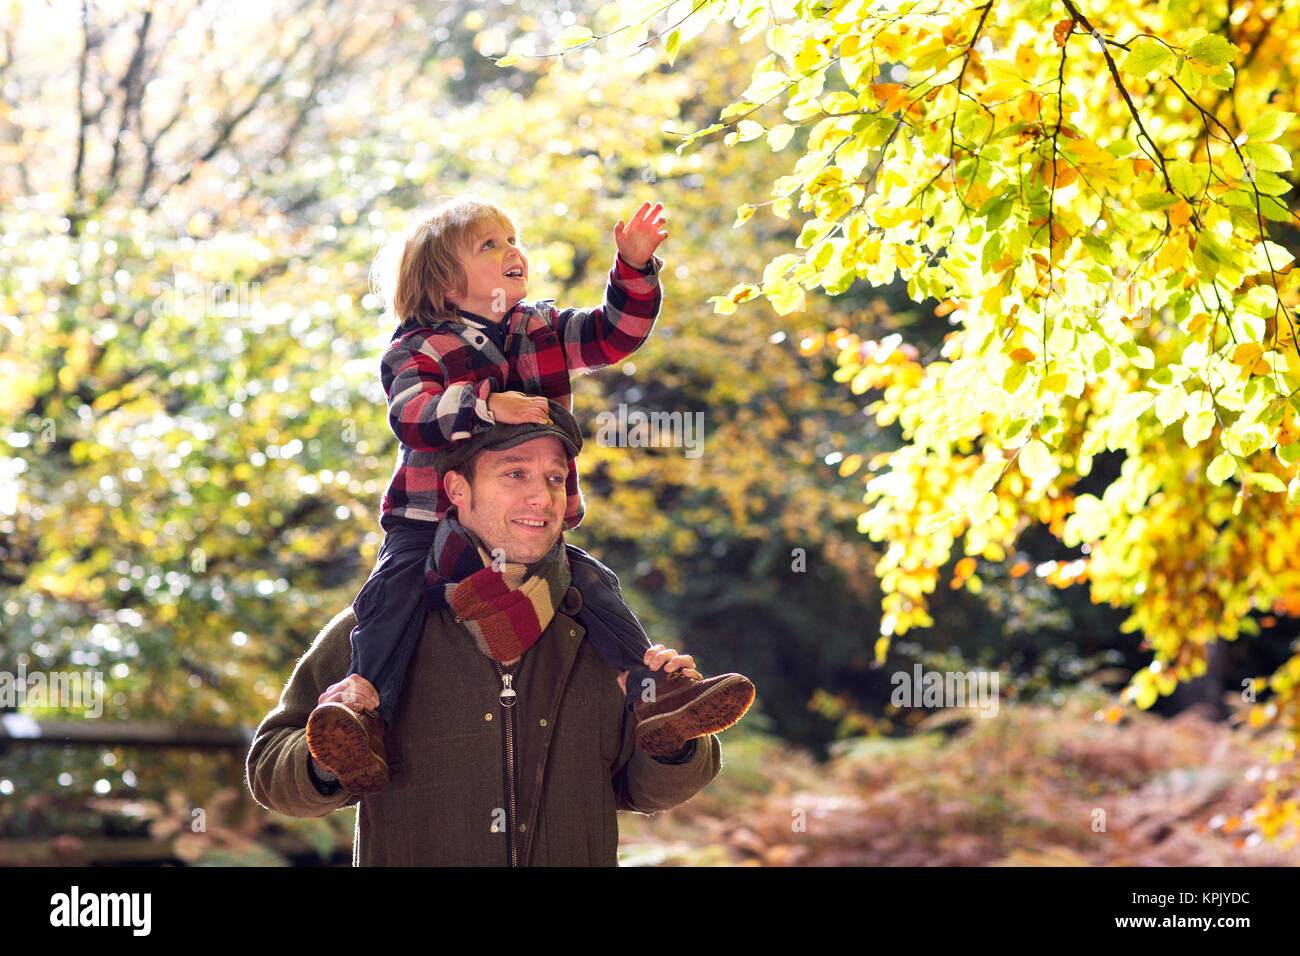 Father carrying young son on his shoulders in woods in Autumn. Stock Photo